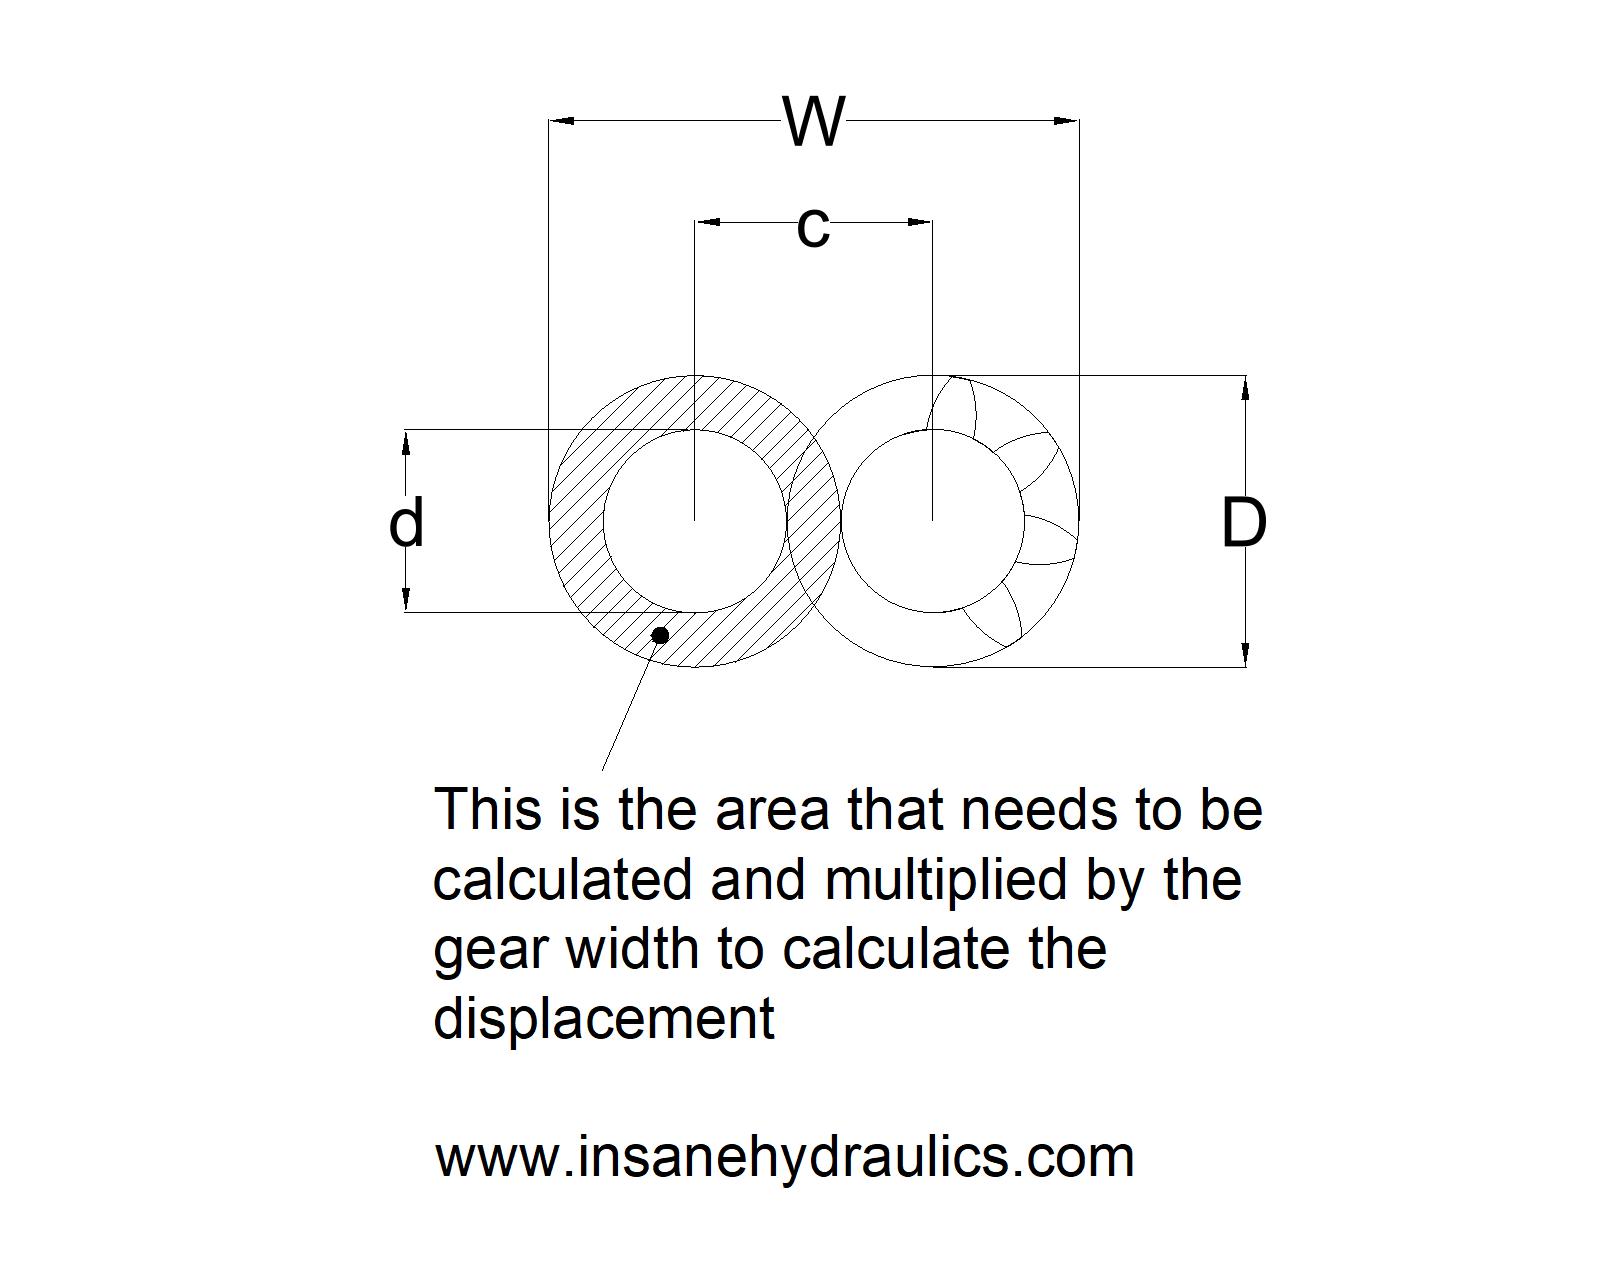 The hollow cylinder, formed by the D and d equals the gear pump's displacement